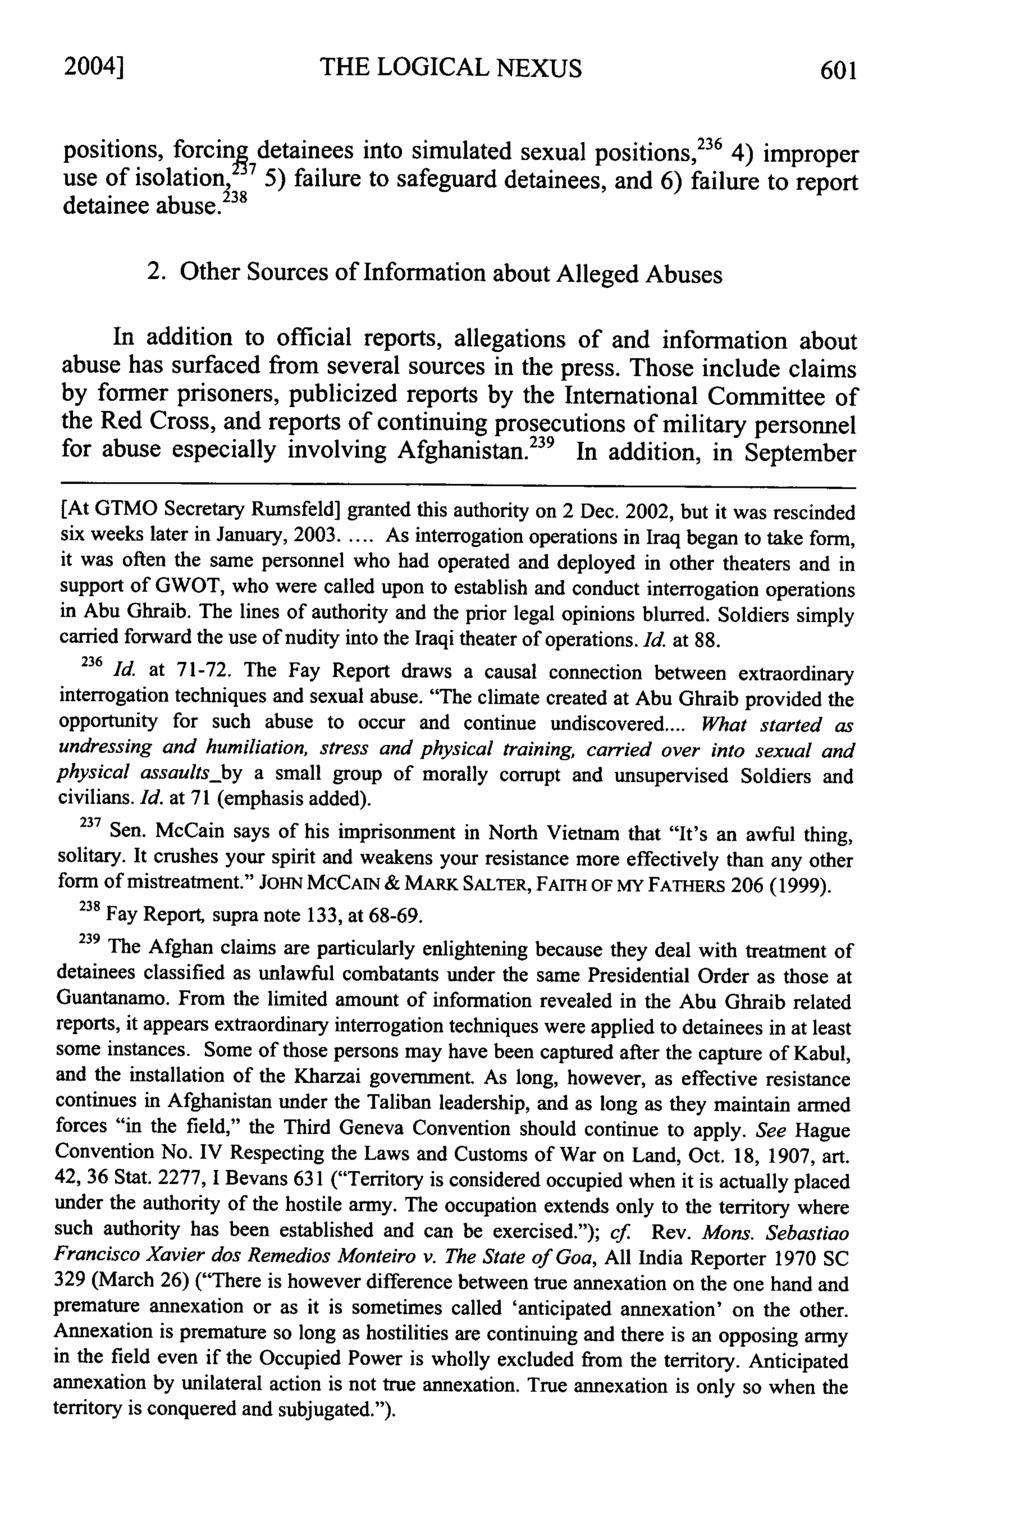 2004] THE LOGICAL NEXUS positions, forcing detainees into simulated sexual positions, 23 ' 4) improper use of isolation, 5) failure to safeguard detainees, and 6) failure to report detainee abuse.